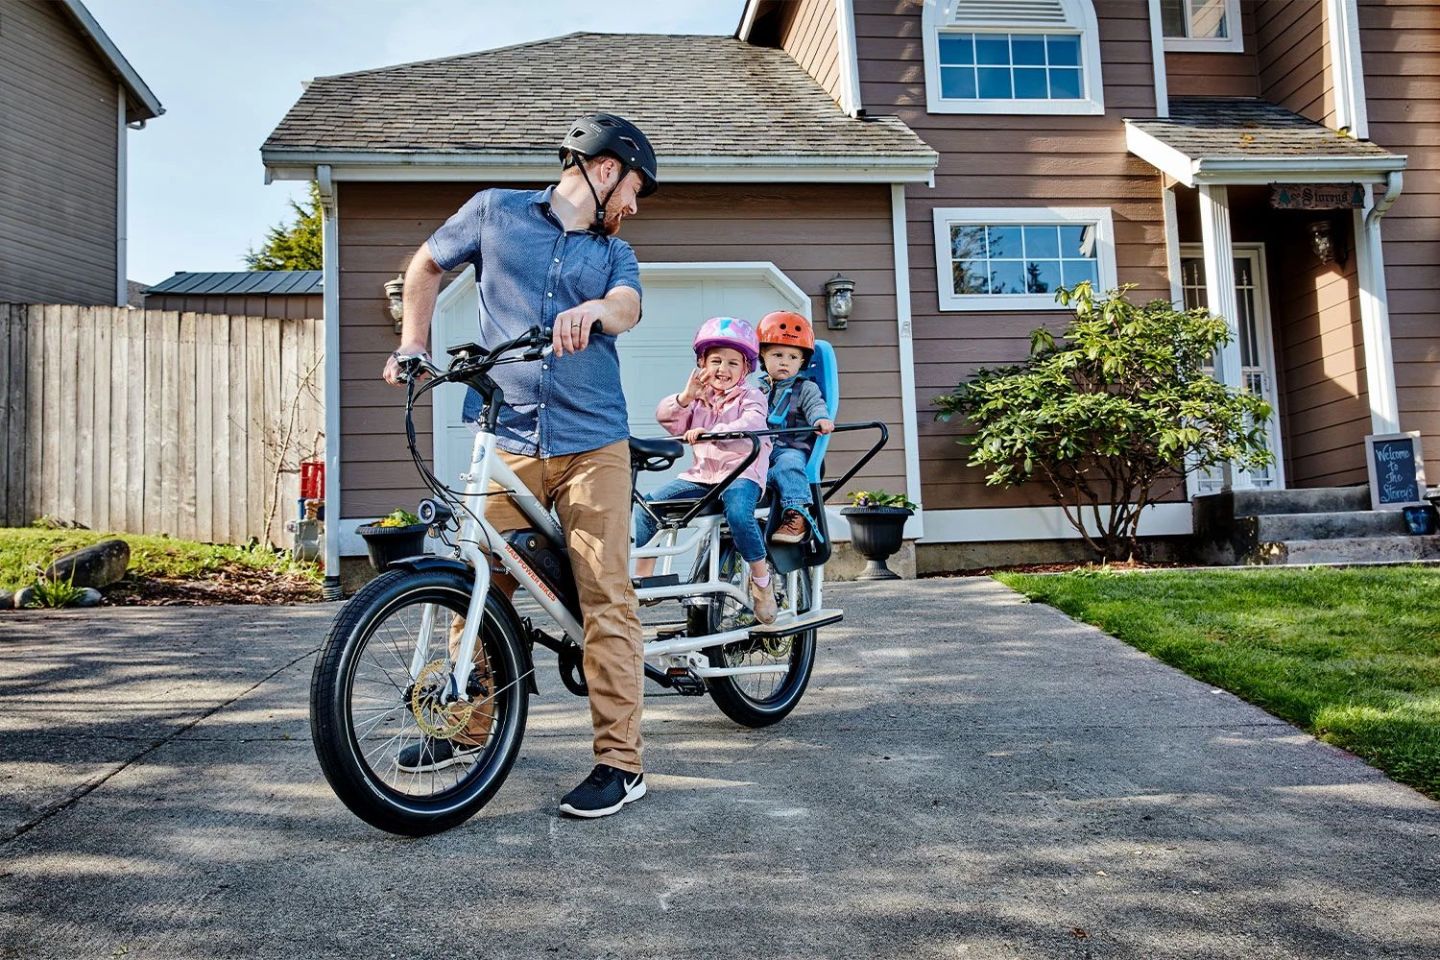 The rear cargo rack can haul up to 120 lb, which could be groceries, packages or the kids